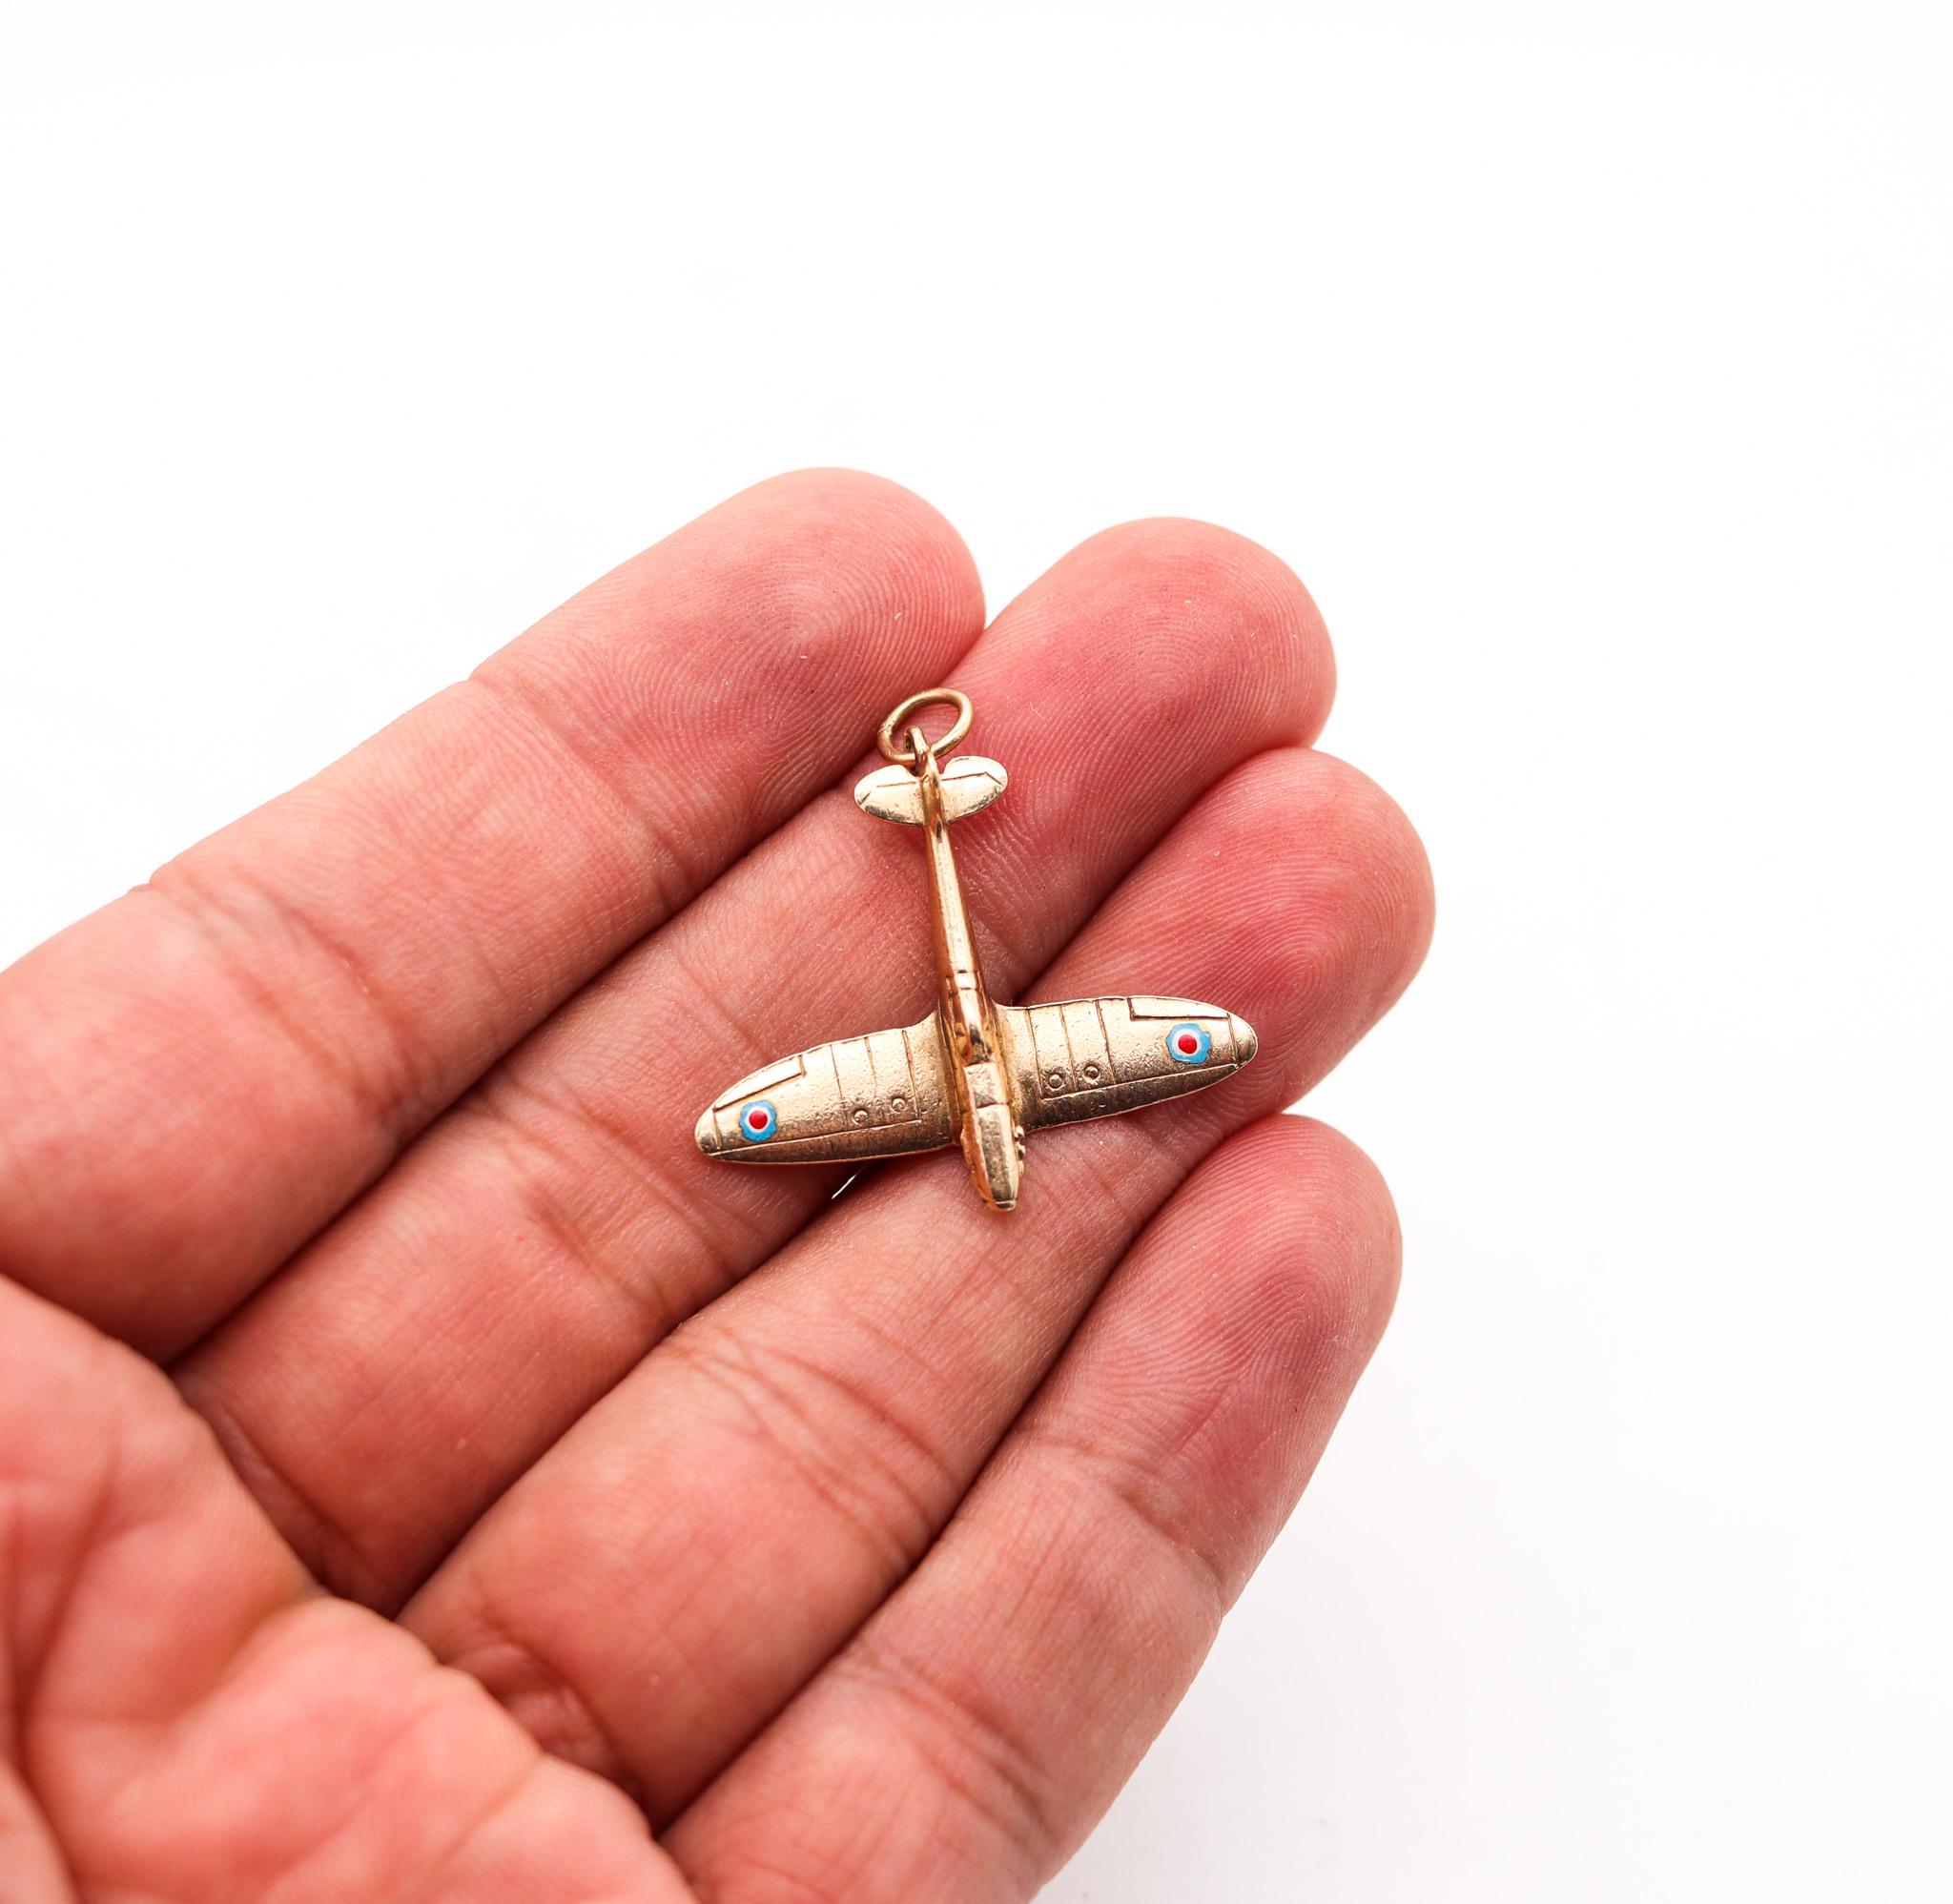 England 1950 Post War Enameled Airplane Pendant Charm In 9Kt Yellow Gold For Sale 1